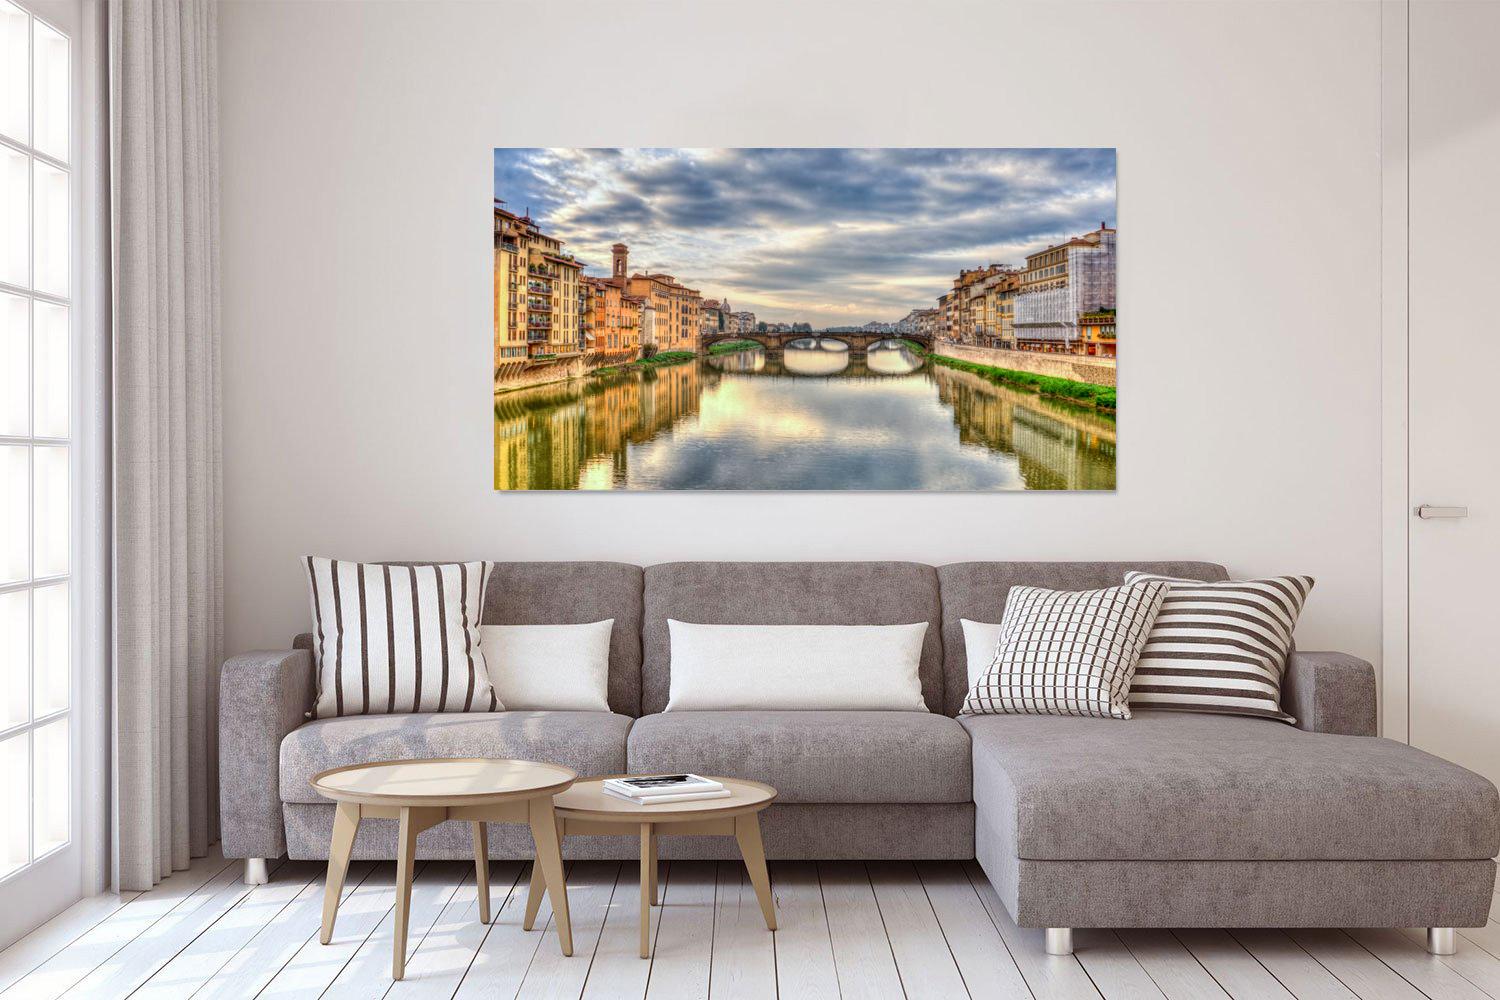 Photo painting on canvas - Bridge over a wide river